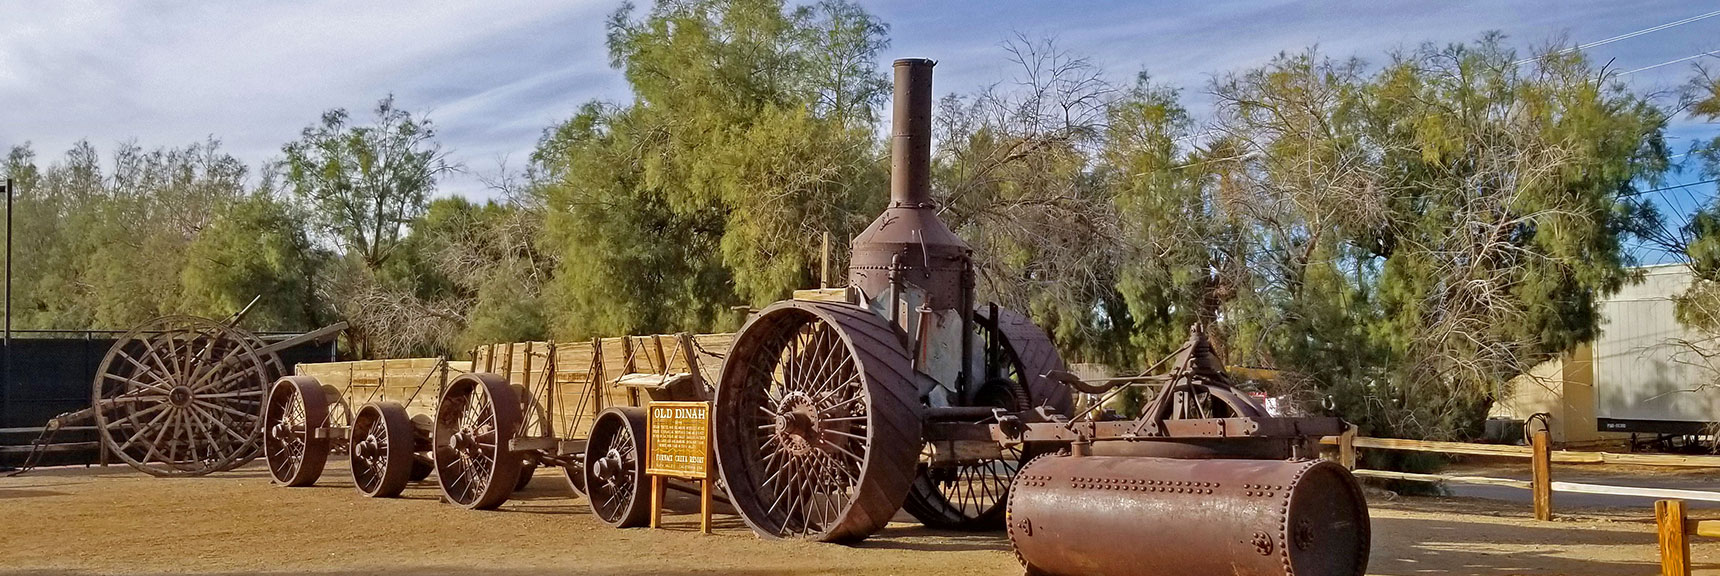 Old Dinah Steam Engine Tried to Substitute Mule Team, Lasted Only a Year. | Twenty Mule Team Canyon | Death Valley National Park, California